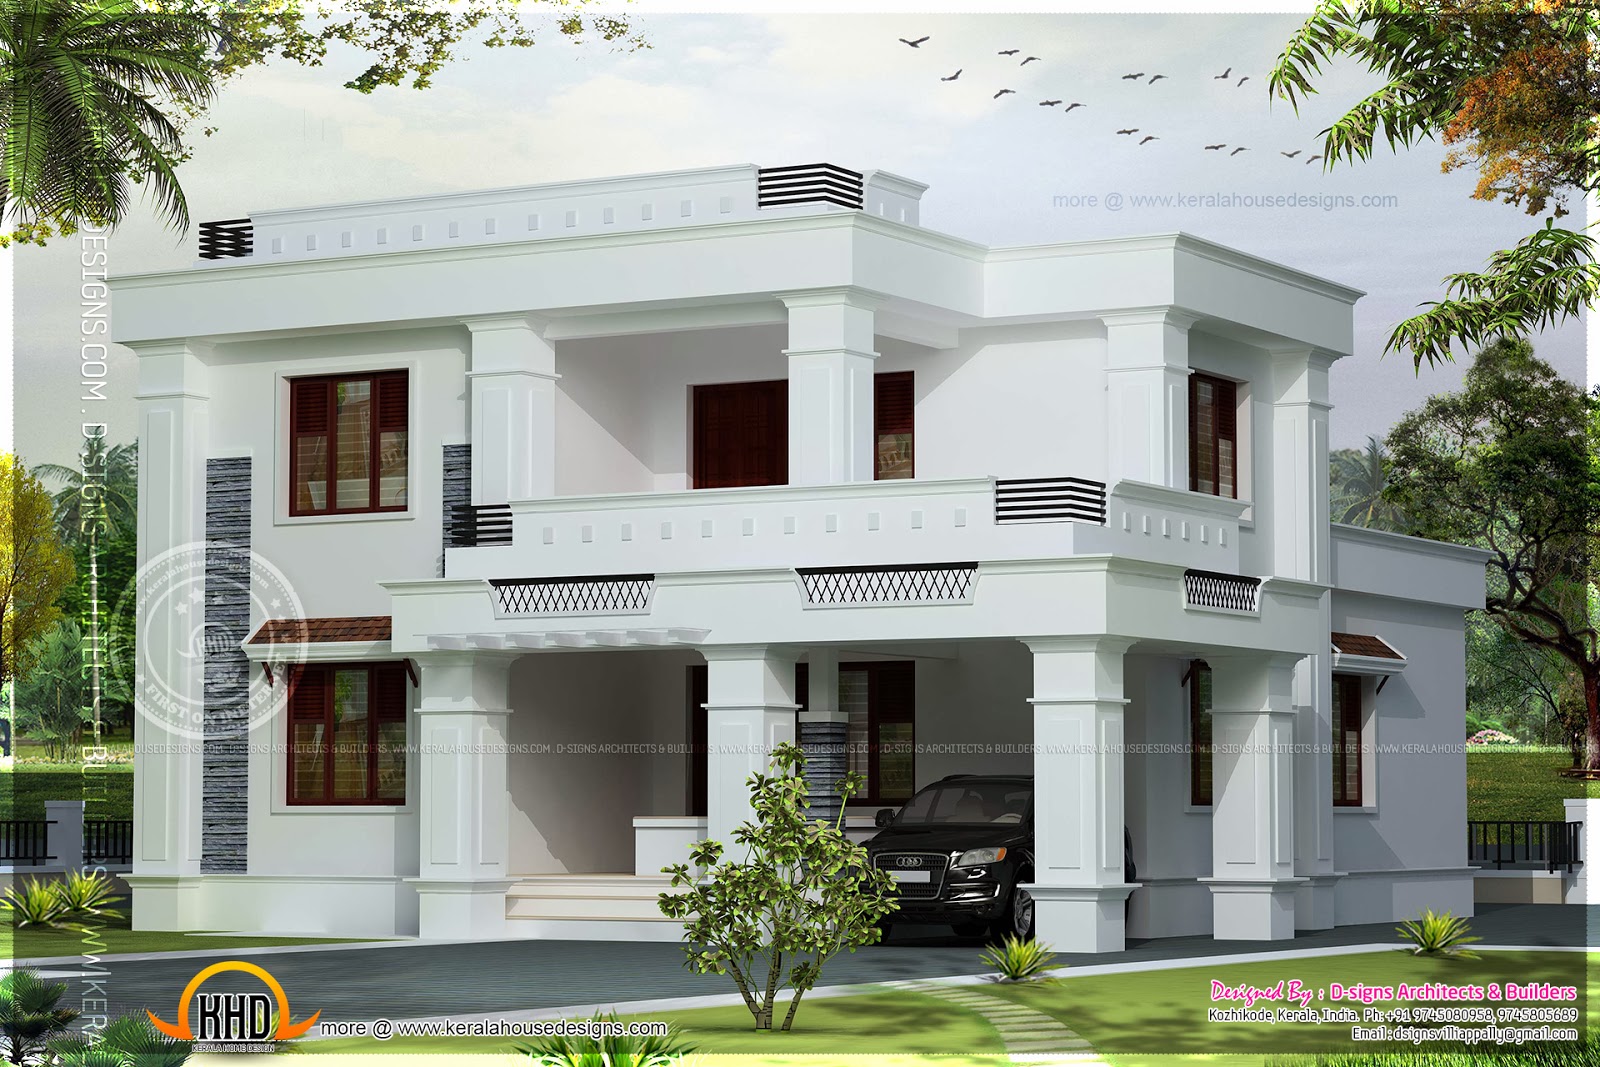  Simple  flat roof  villa in 2042 square feet Indian House  